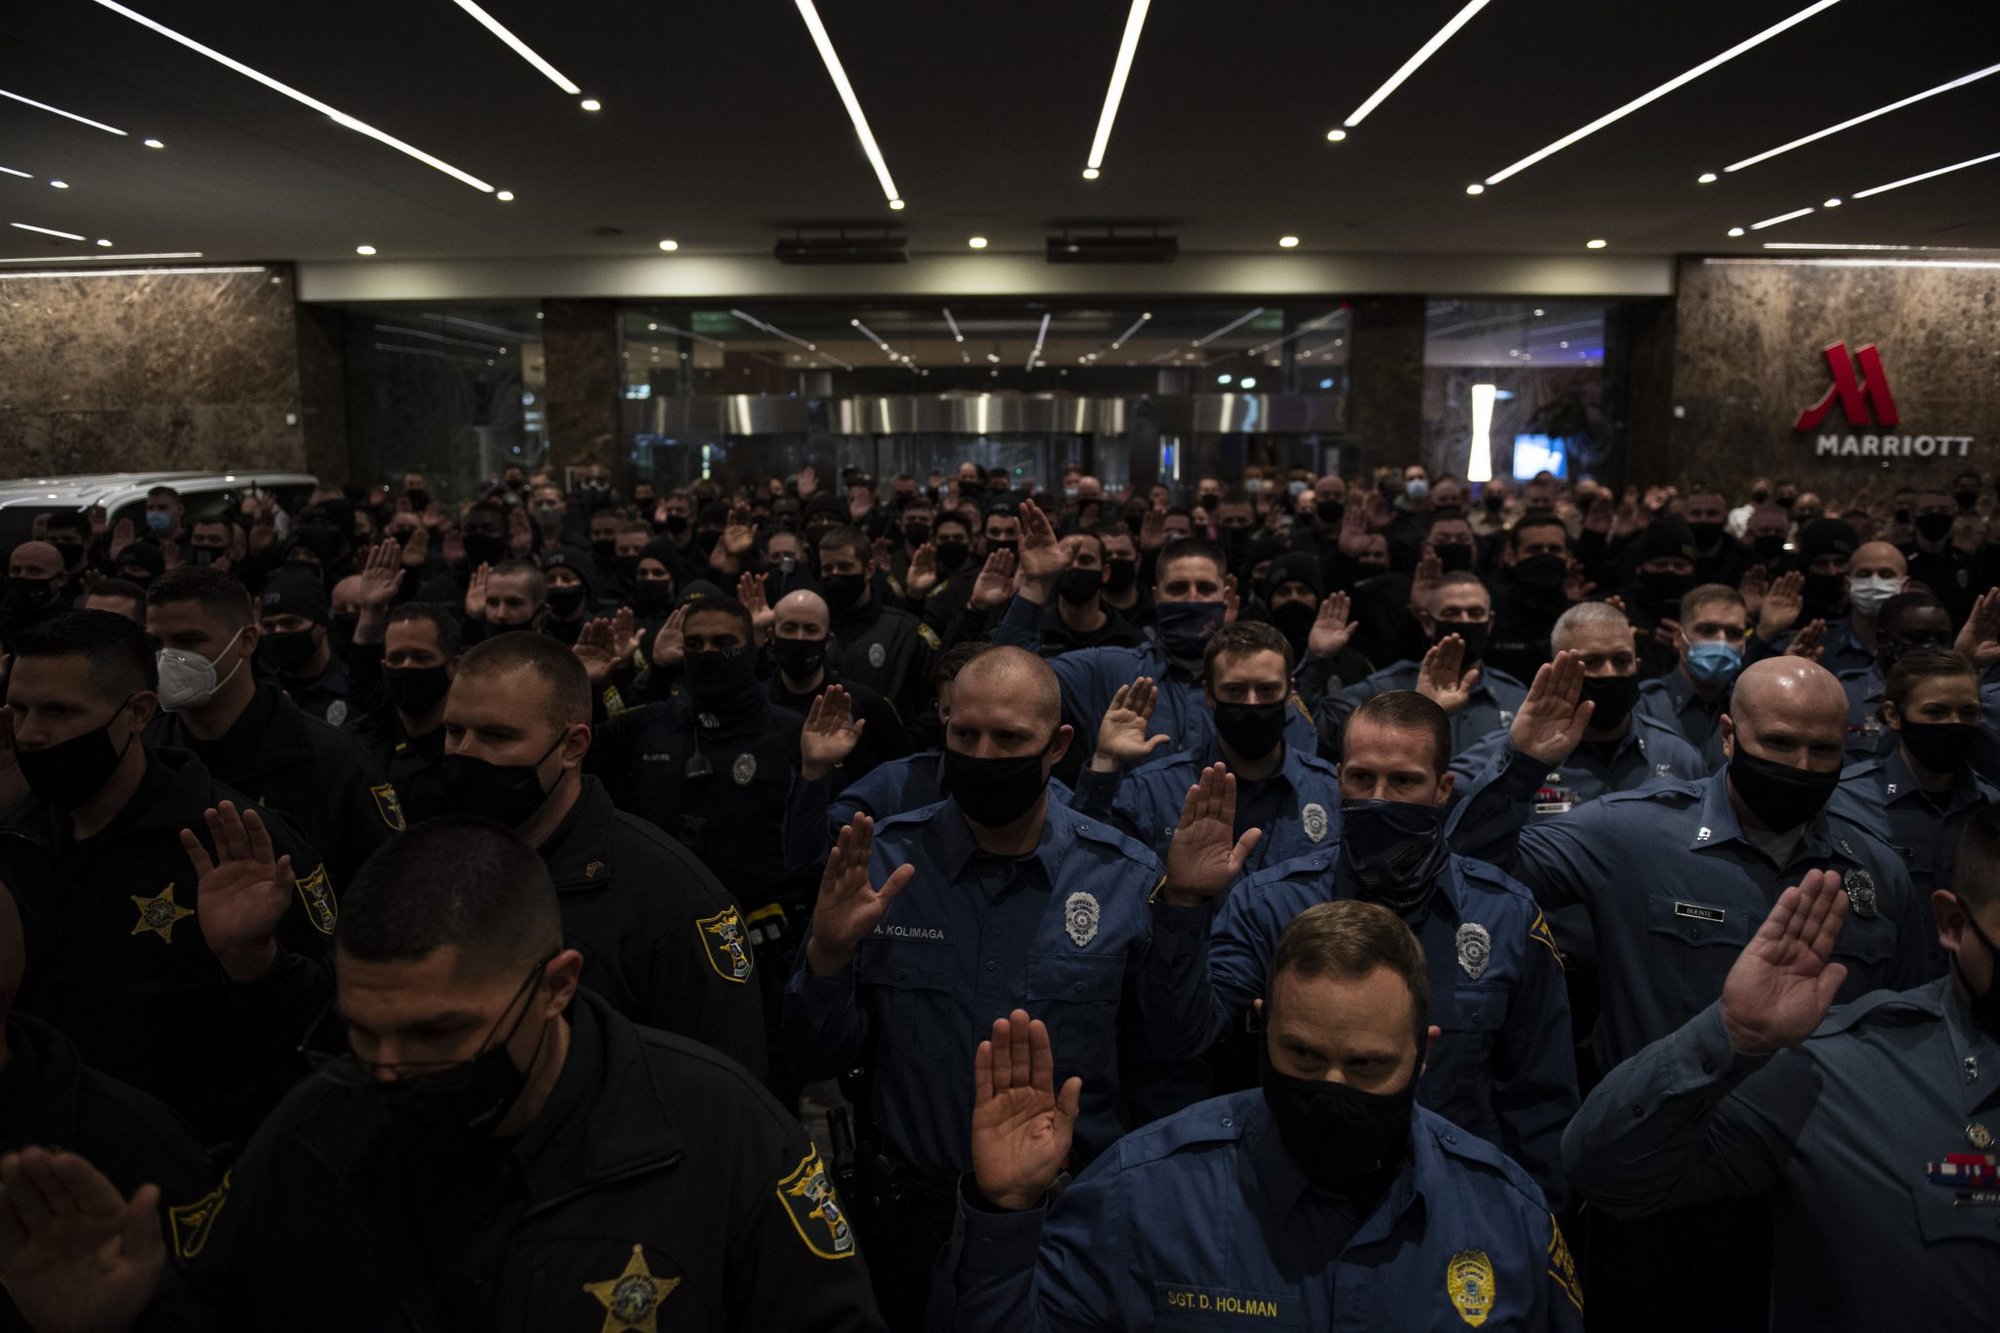 Us Marshals Swear In 4 000 Plus Special Deputies From National Guard